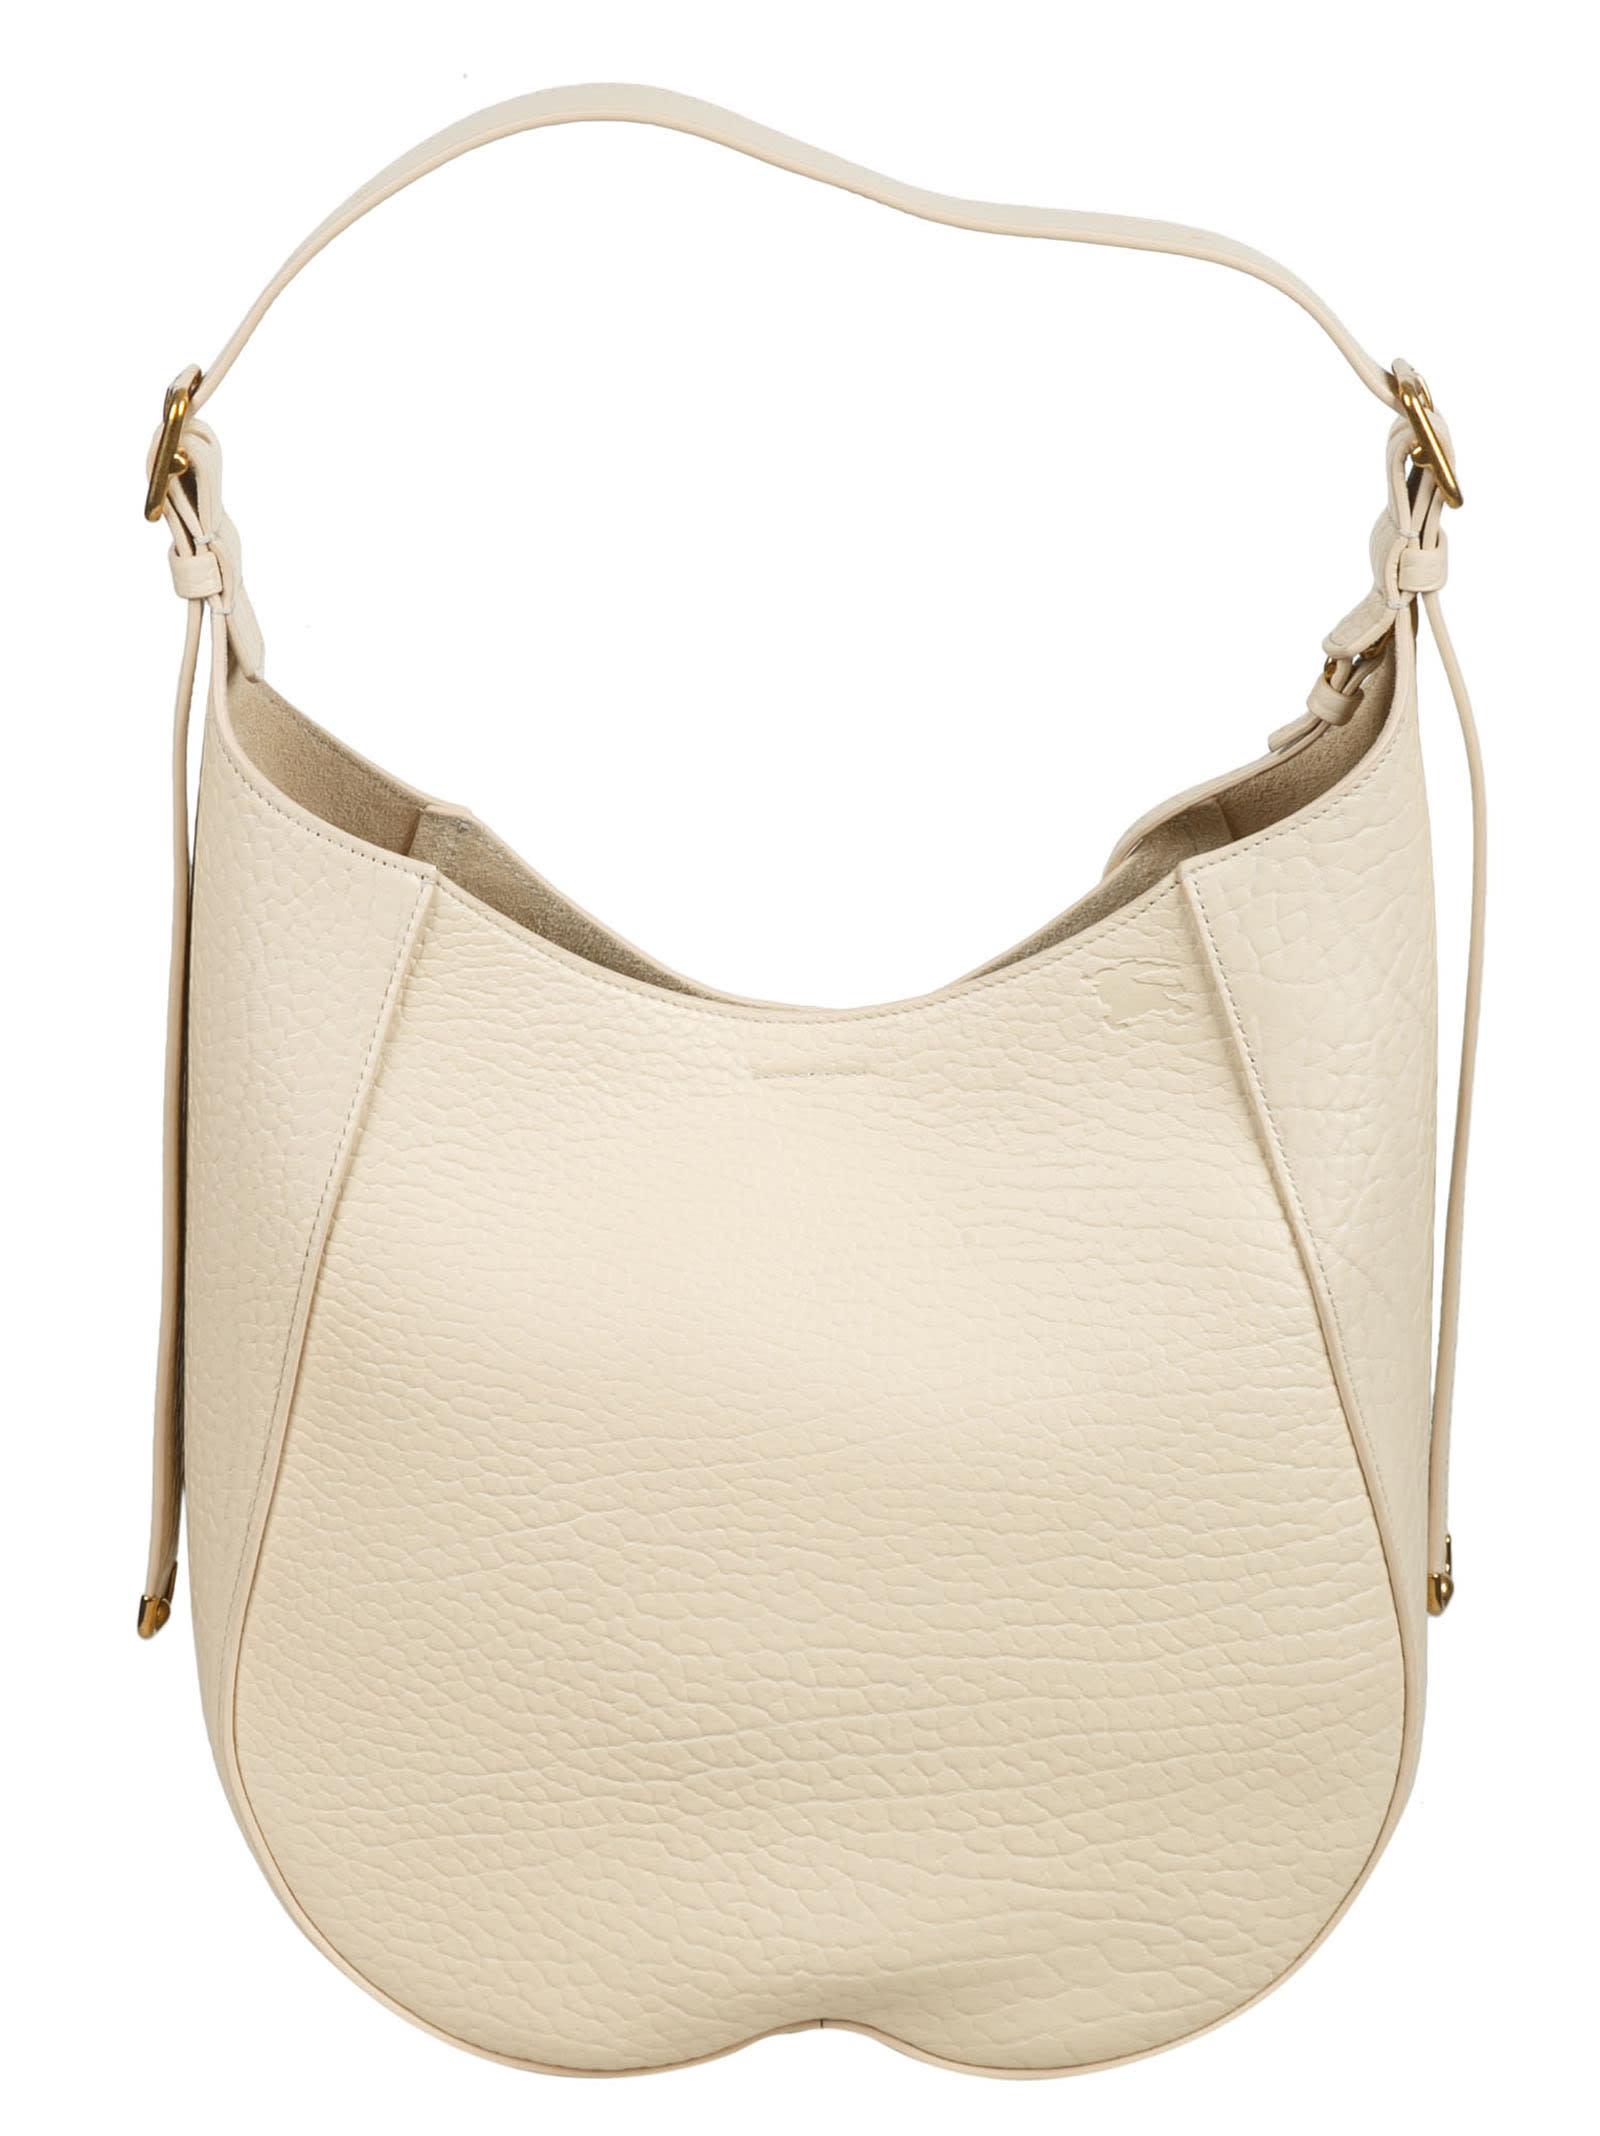 Burberry Women's Extra Large Chess Leather Shoulder Bag - Pearl